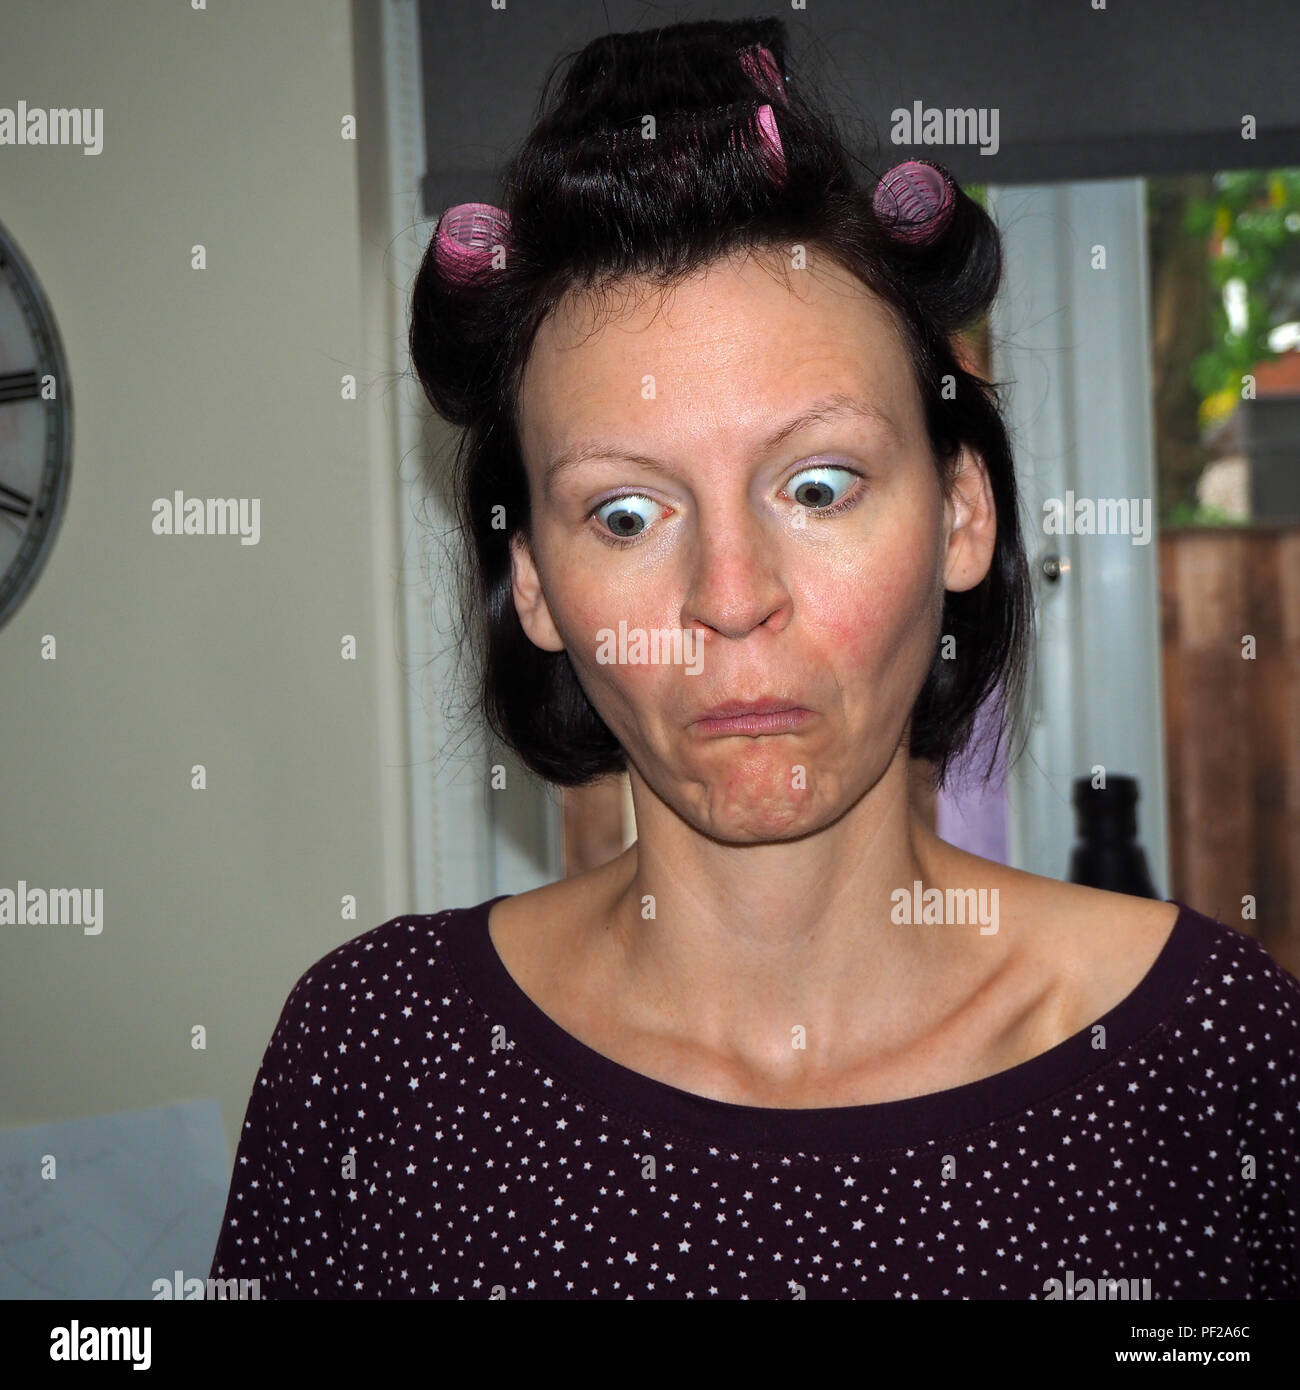 Woman pulling faces with curlers in her hair. Stock Photo